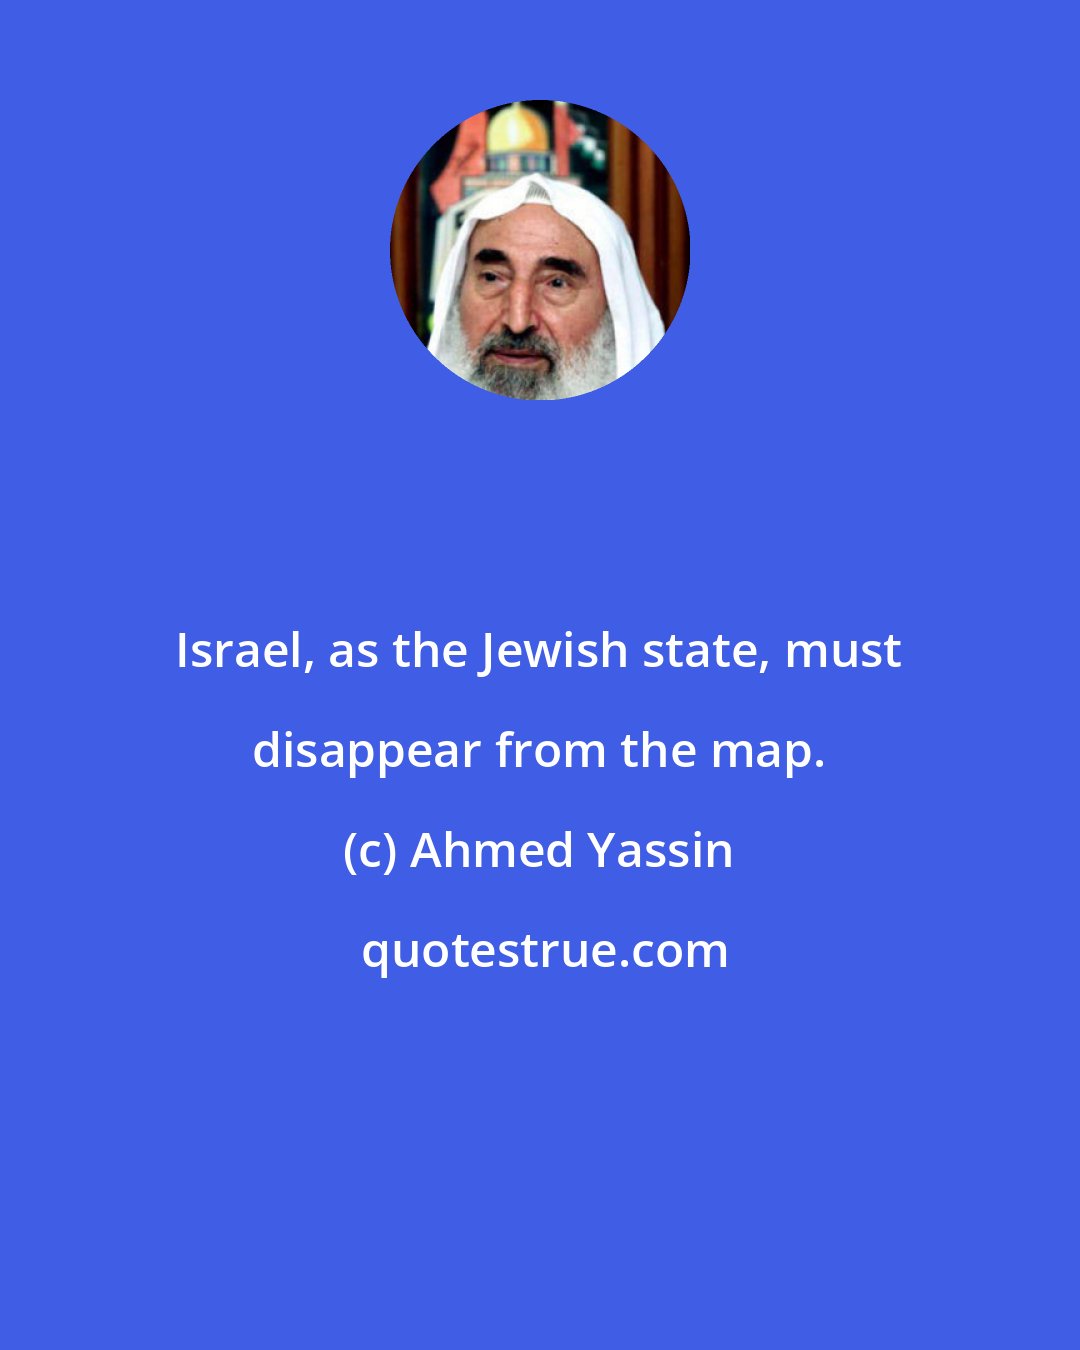 Ahmed Yassin: Israel, as the Jewish state, must disappear from the map.